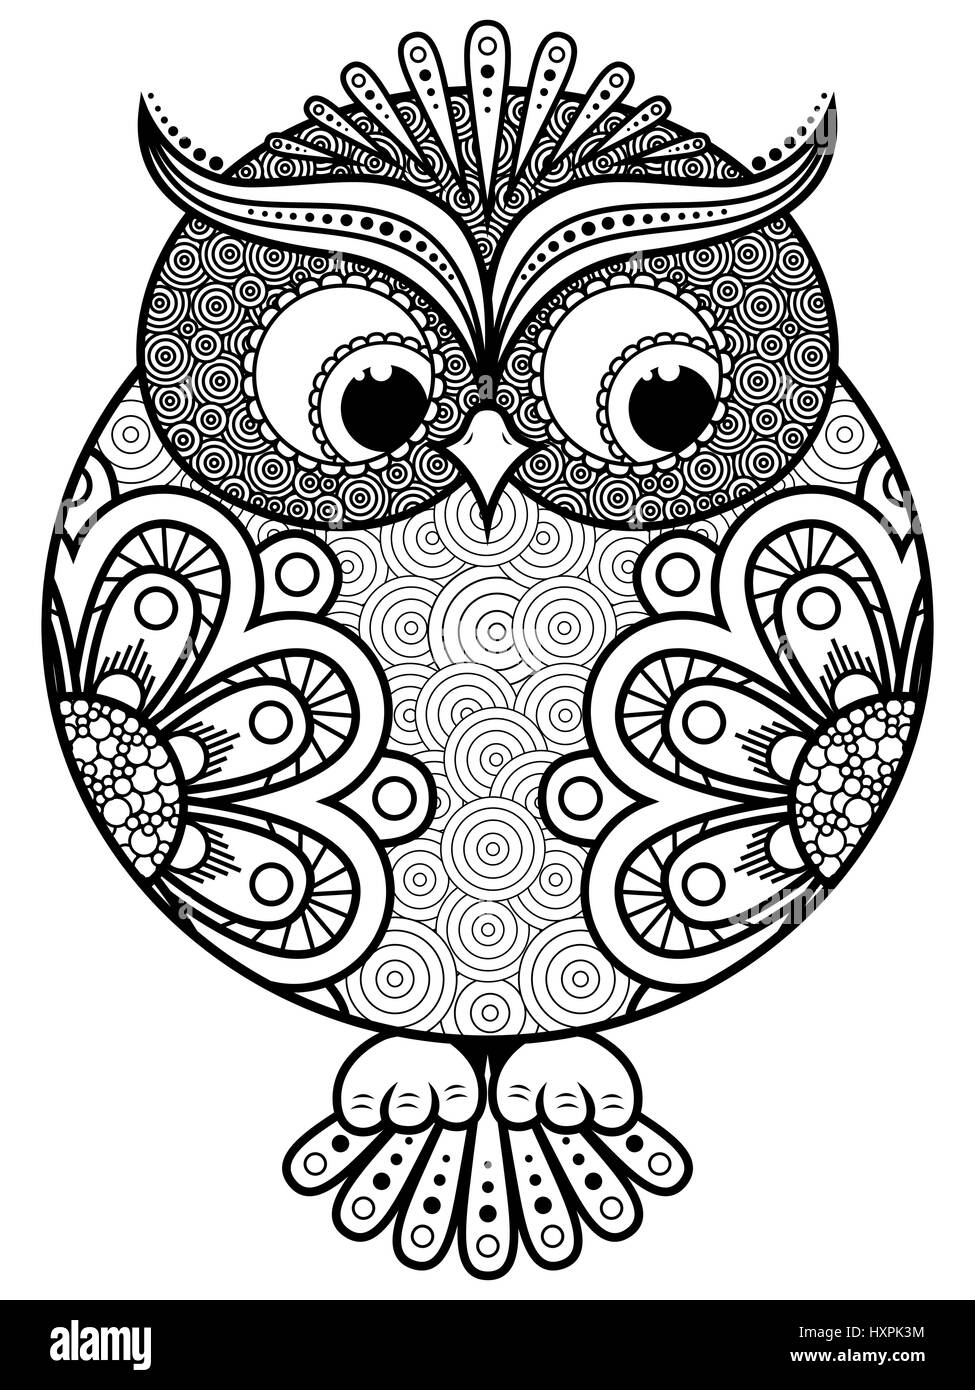 Big stylized ornate rounded owl, black vector contour isolated on white background Stock Vector